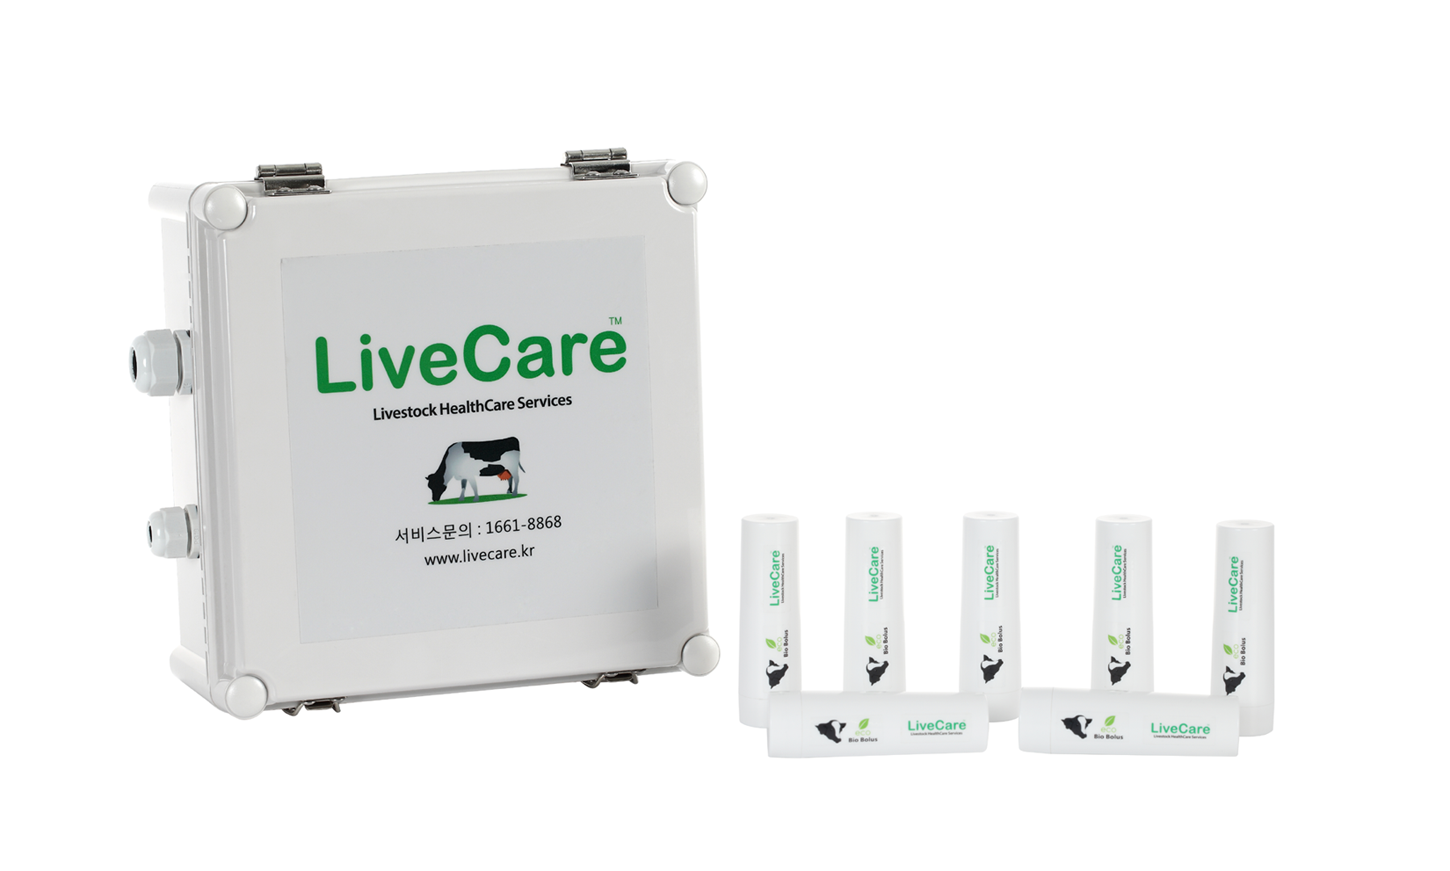 The LiveCare data gathering device and capsules